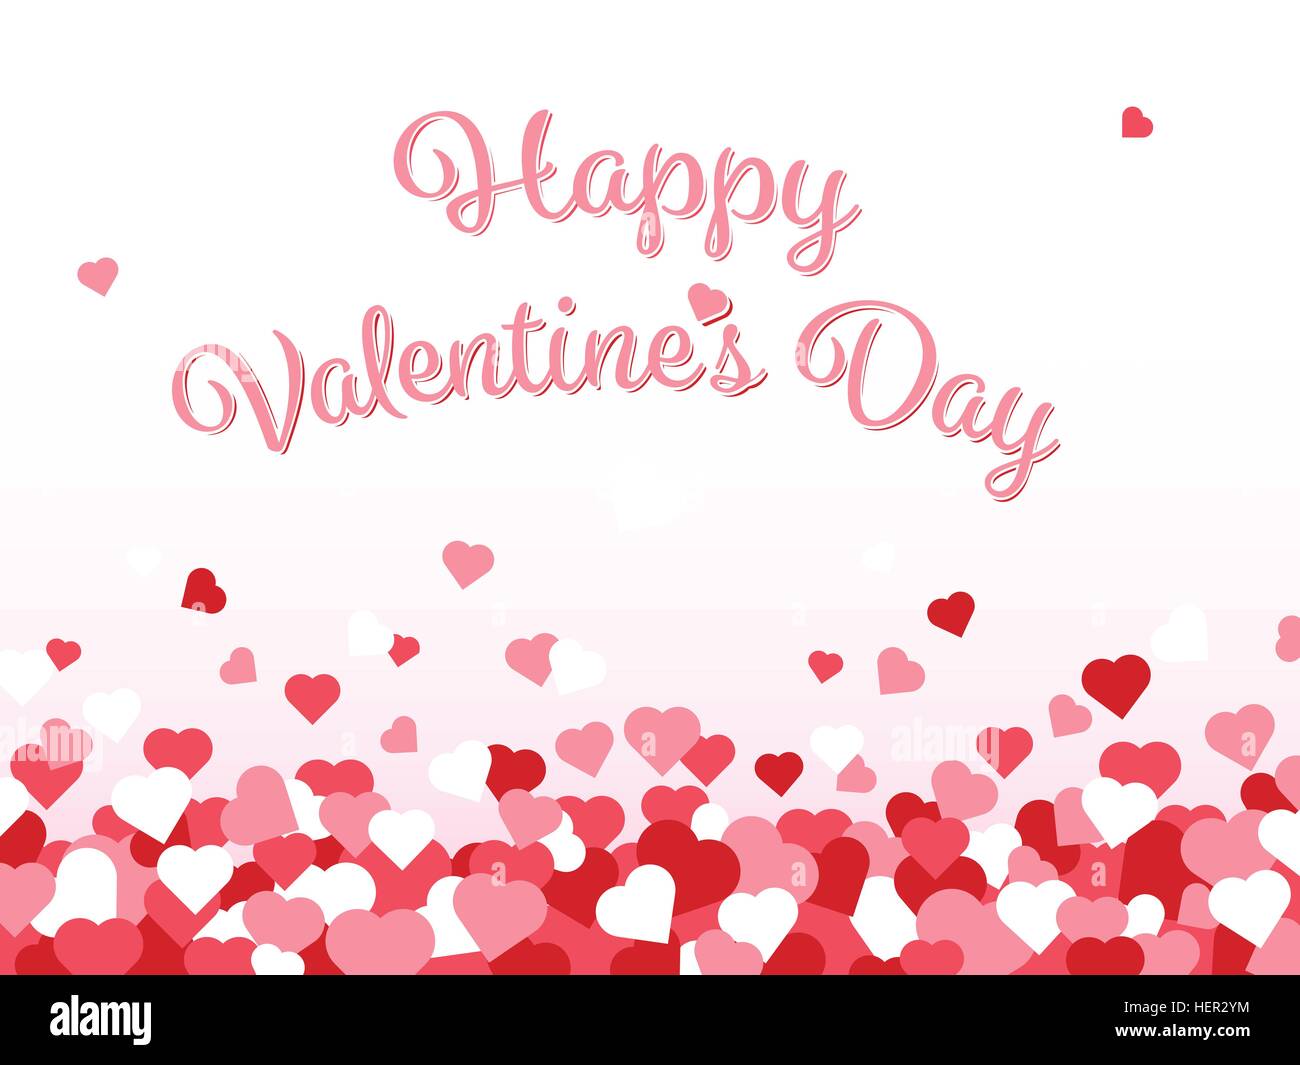 Valentines Day greetings with hearts and text Stock Vector